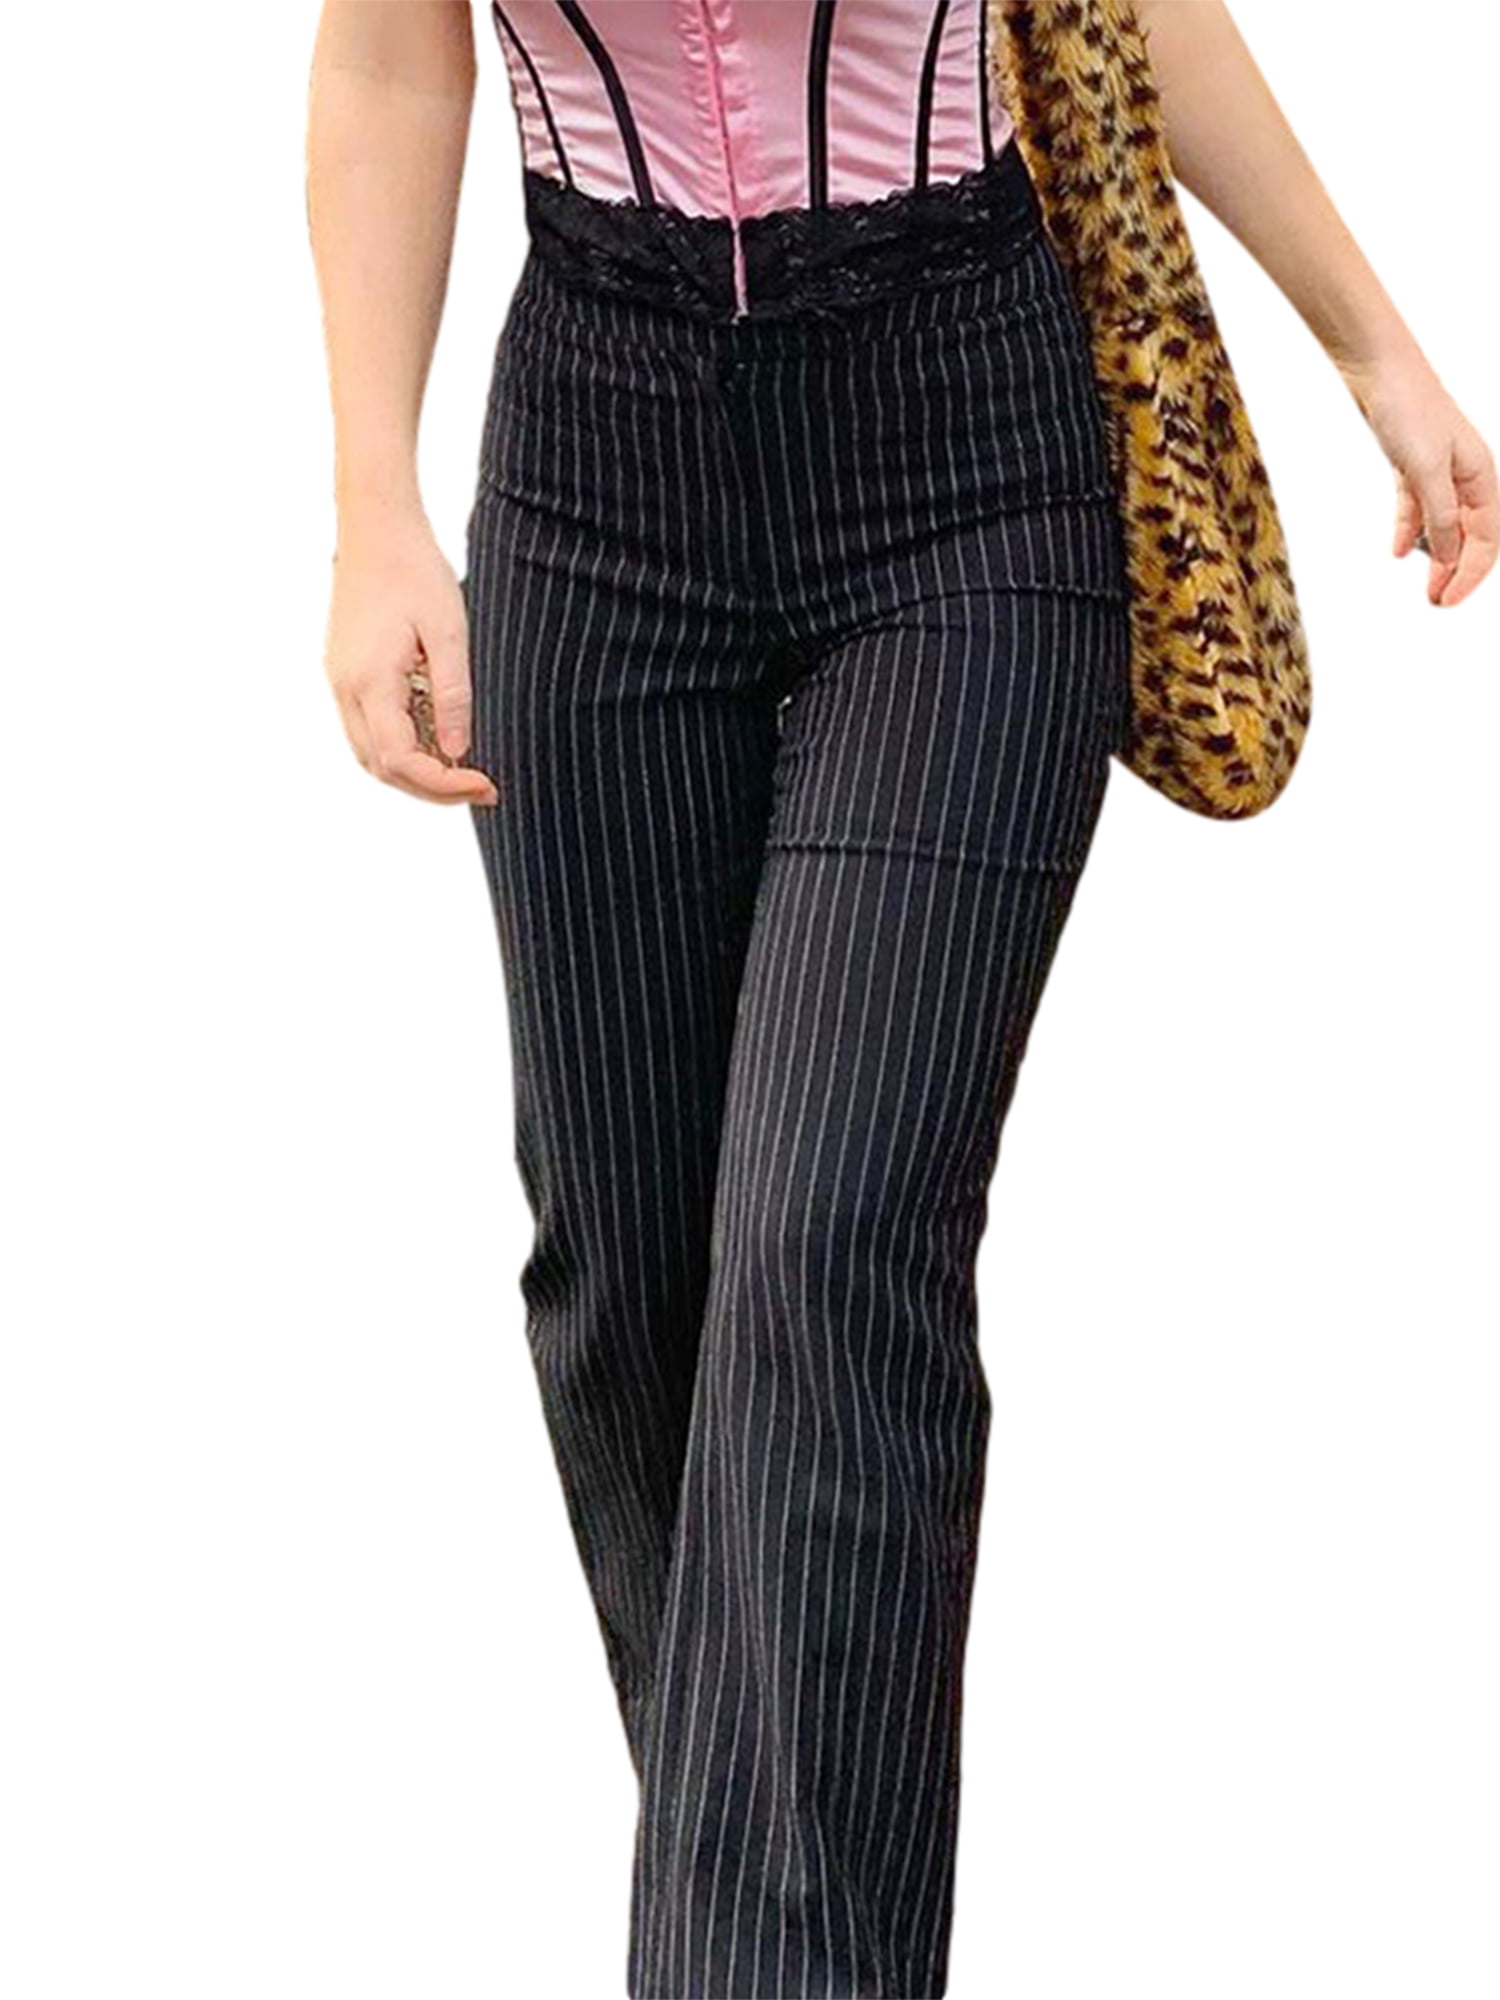 pinstripe pants black stripy pants Vintage trousers trousers with pockets 90s rope-pattern trousers